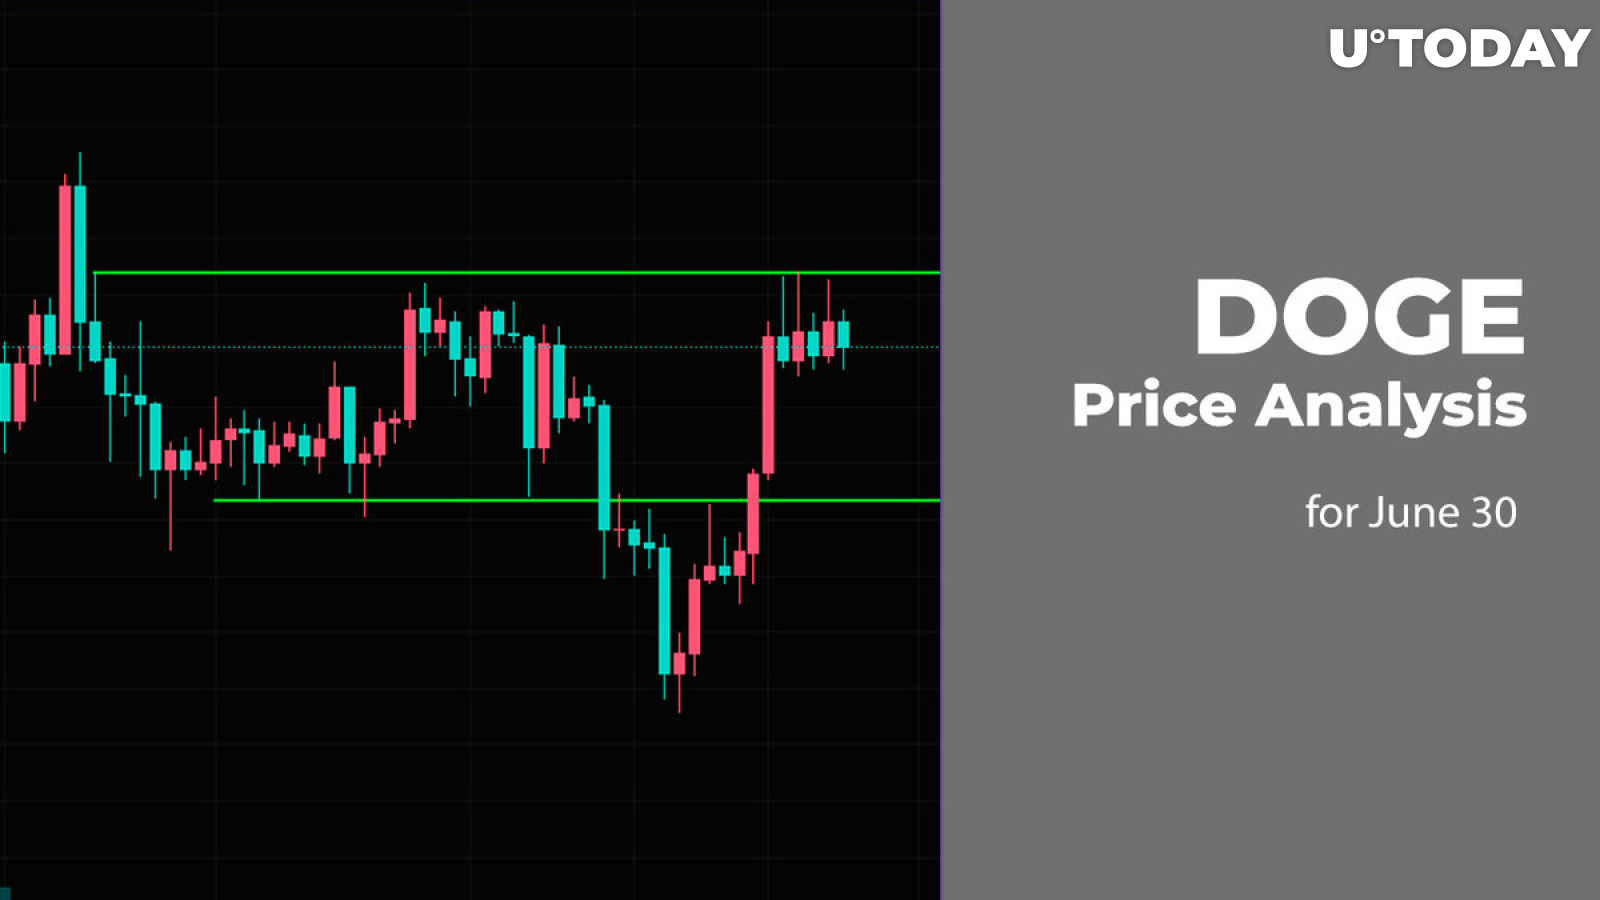 DOGE Price Analysis for June 30